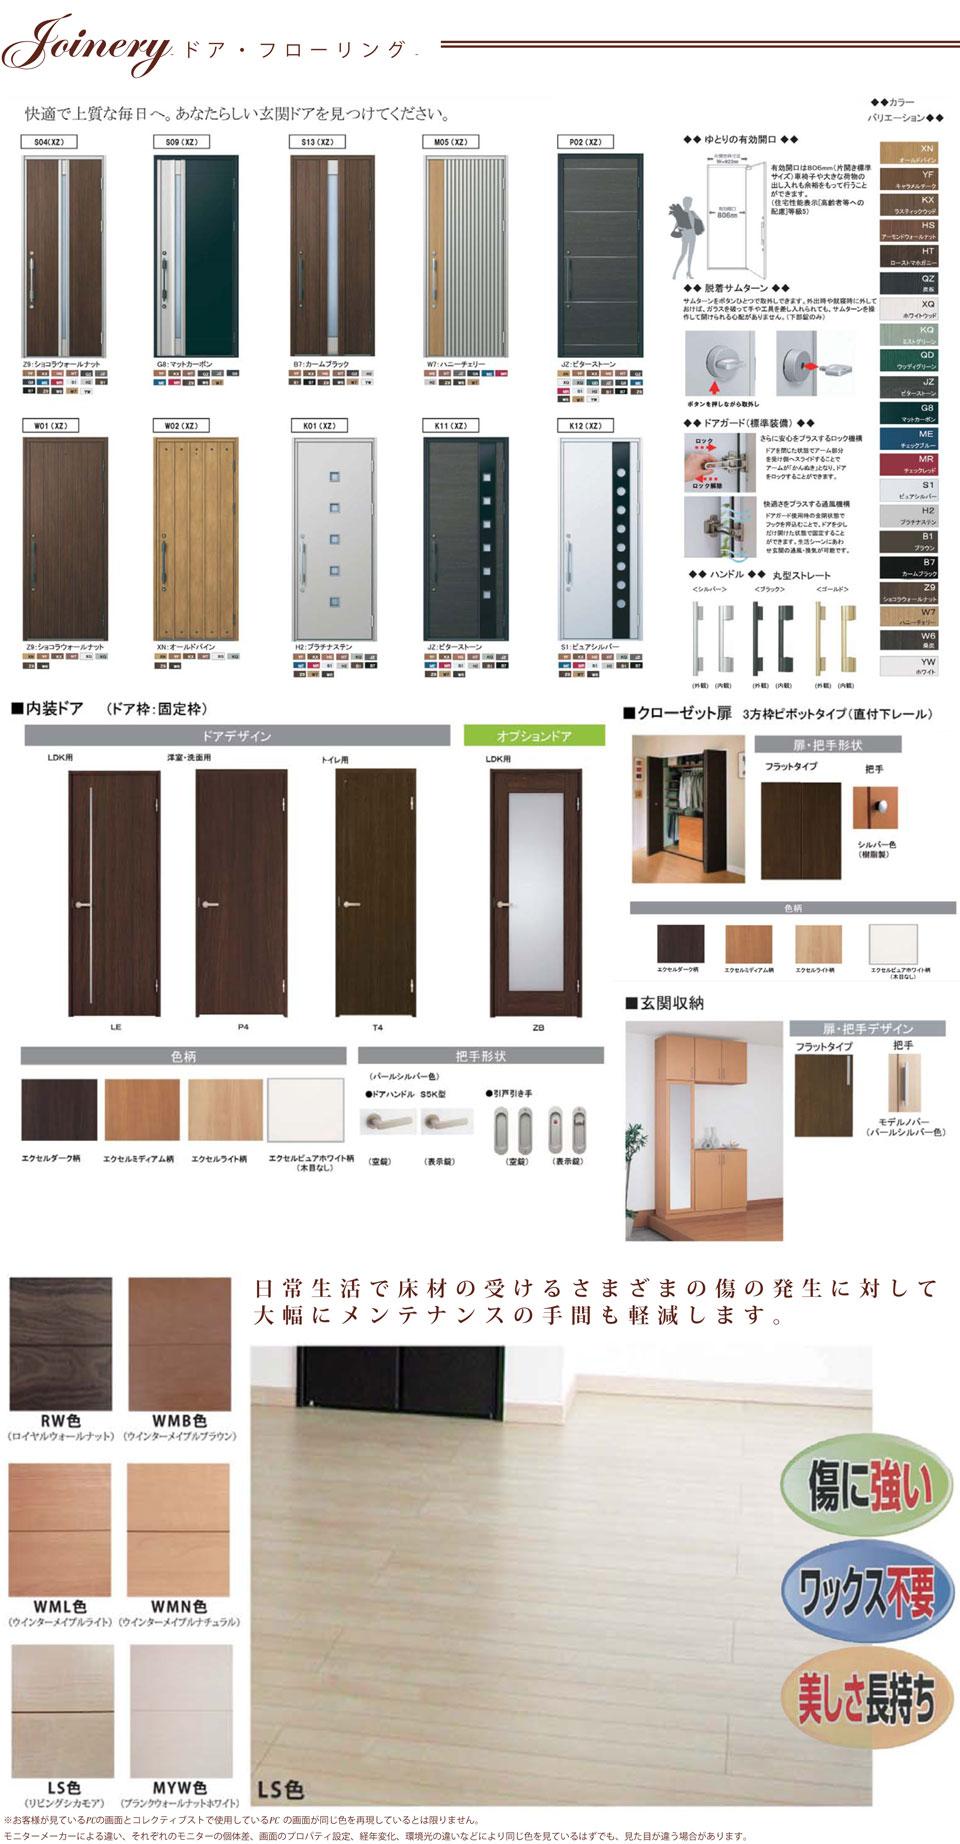 Other. Standard Specifications: joinery